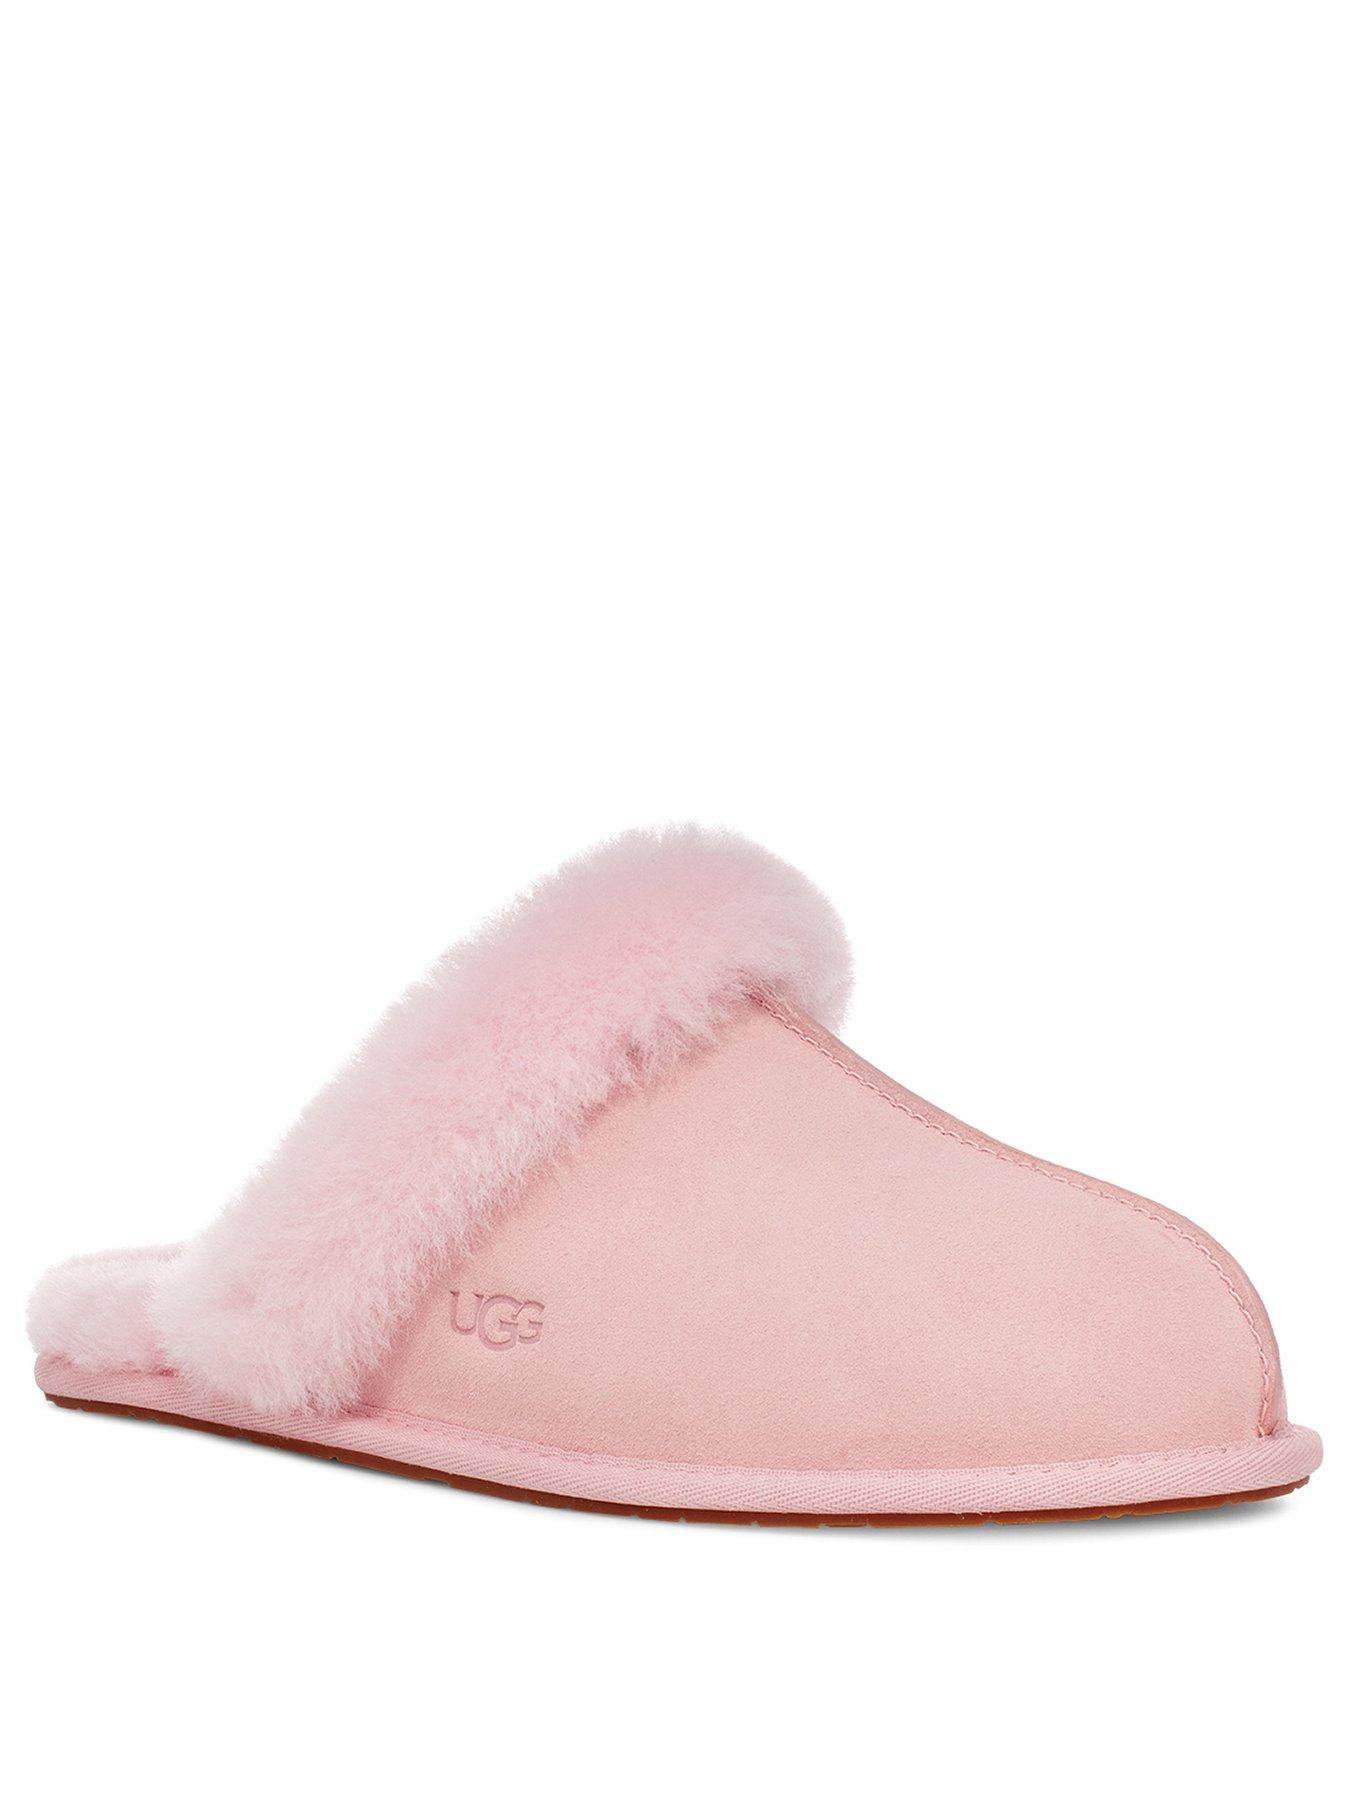 ladies ugg slippers size 